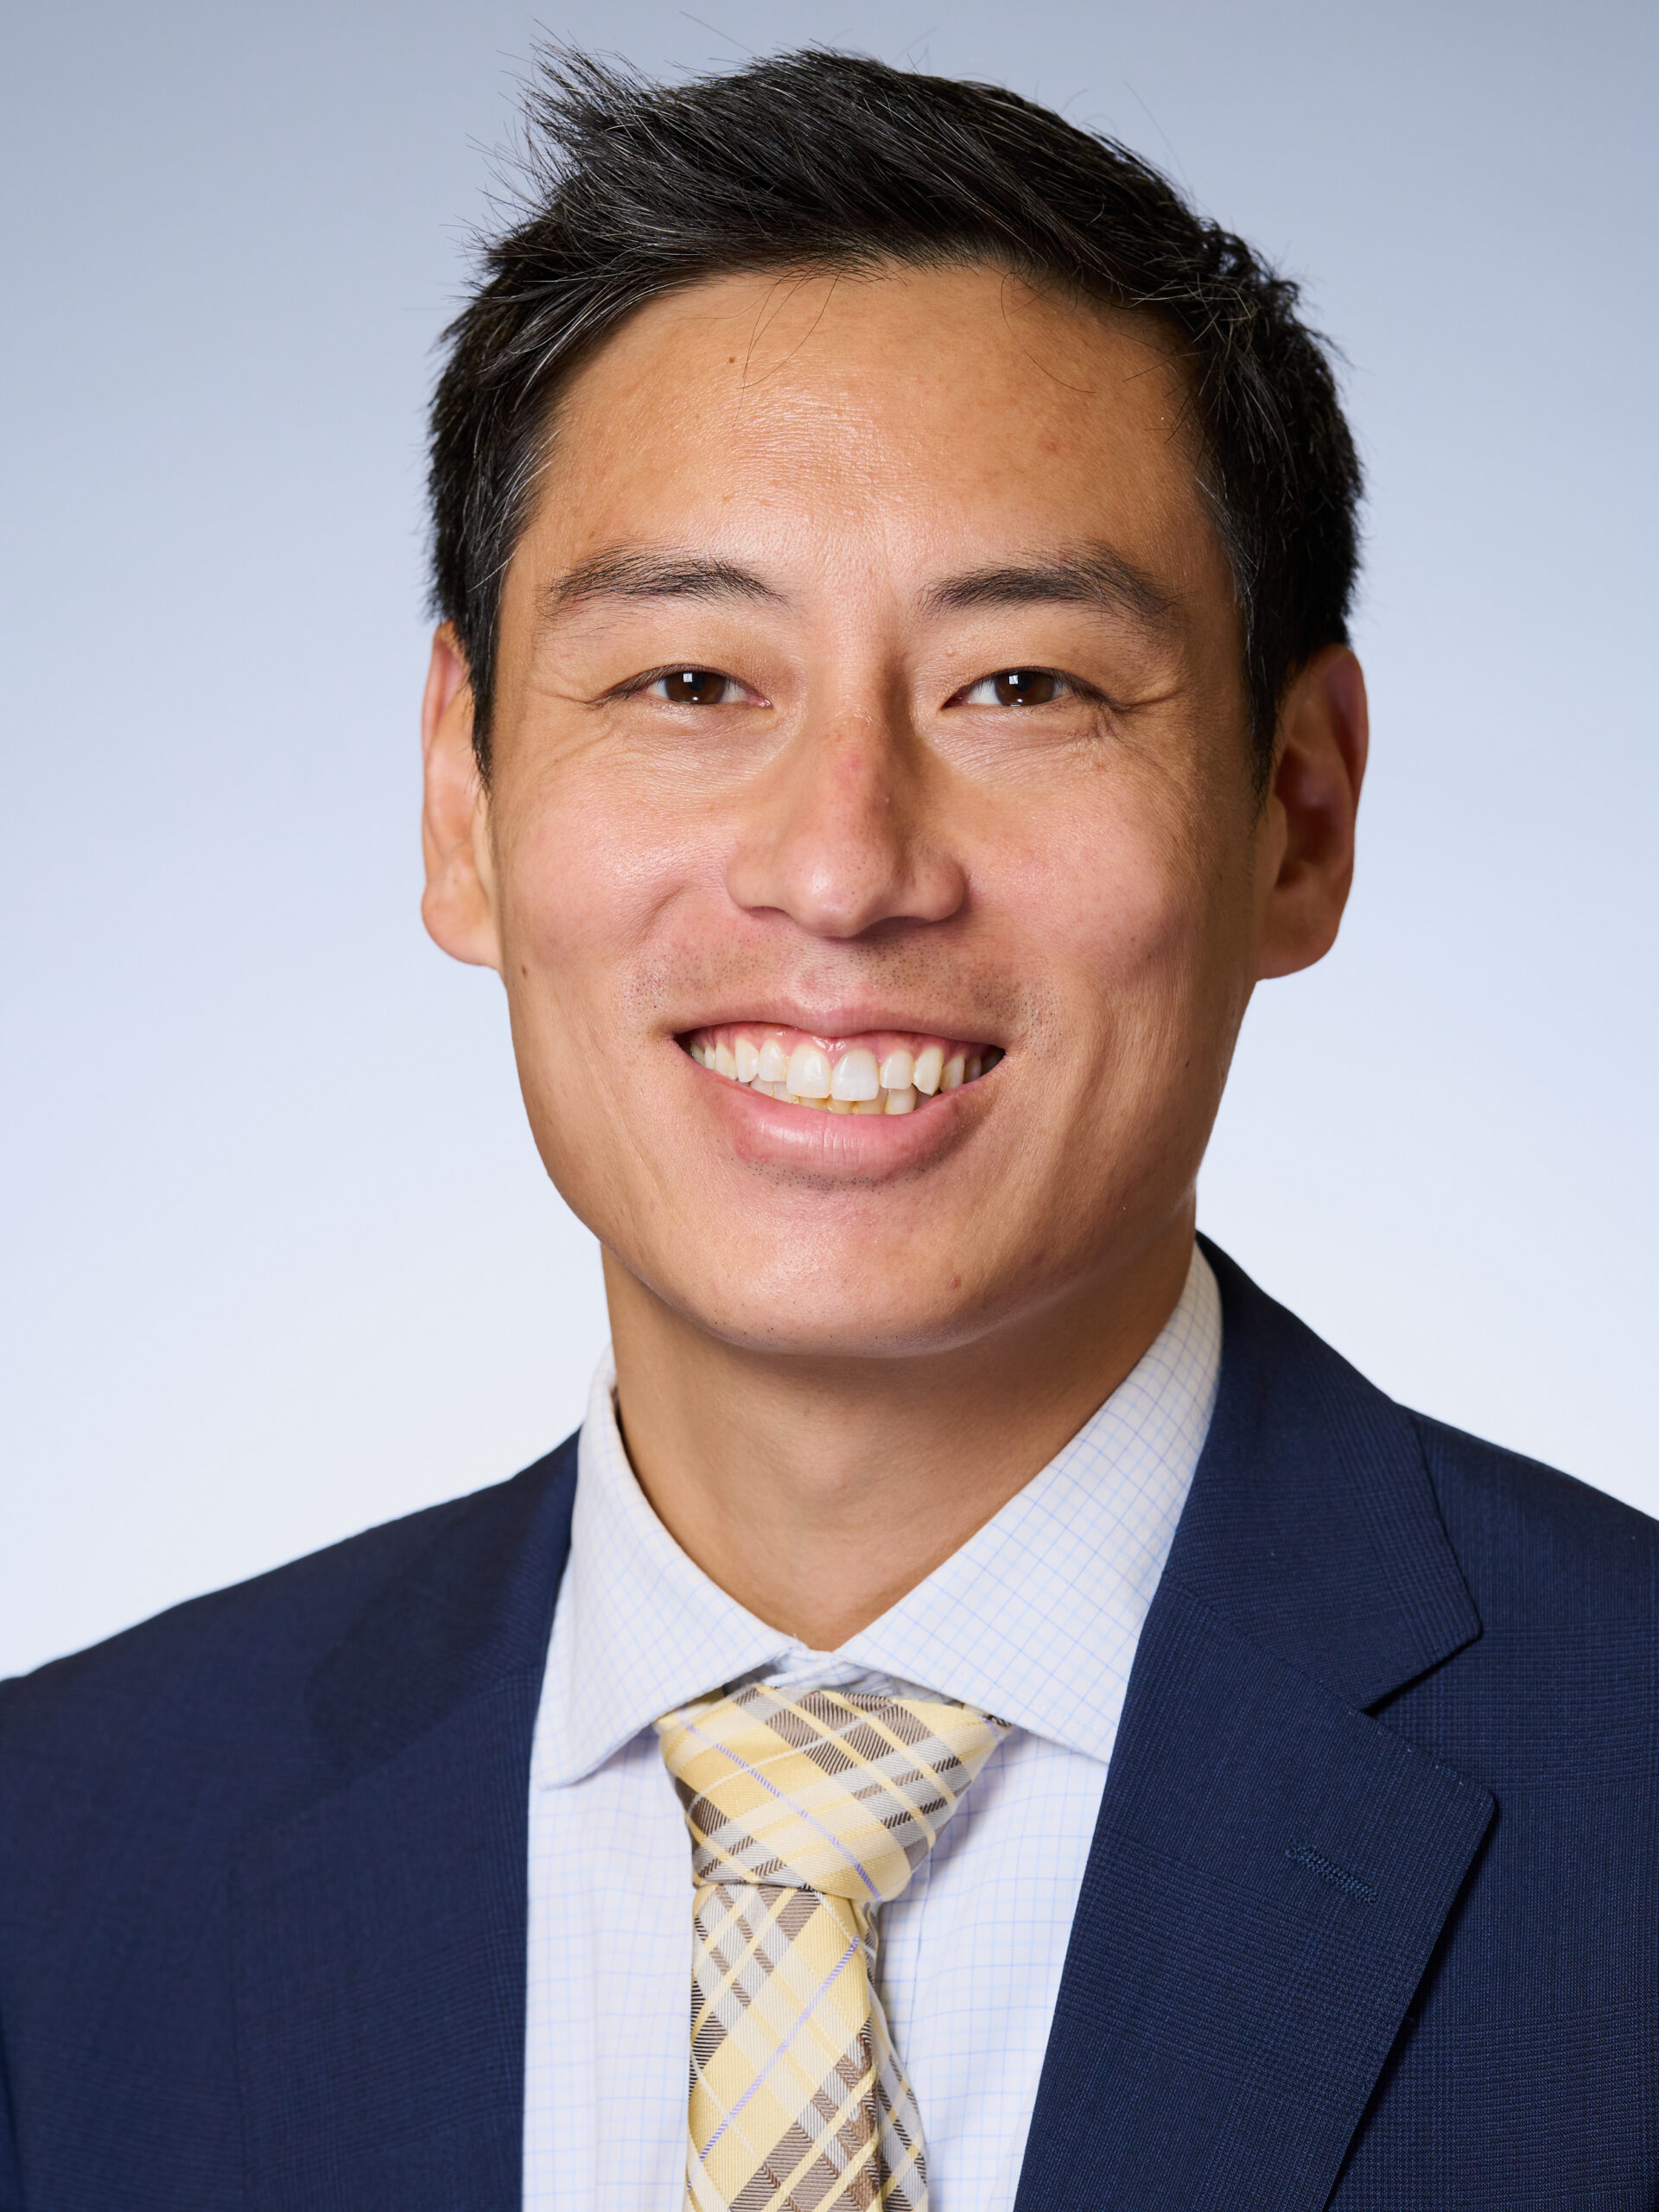 Dr. Tan is Interviewed by UroToday on The Effect of Visual and Numeric Risk Information on Surgeon Behavior